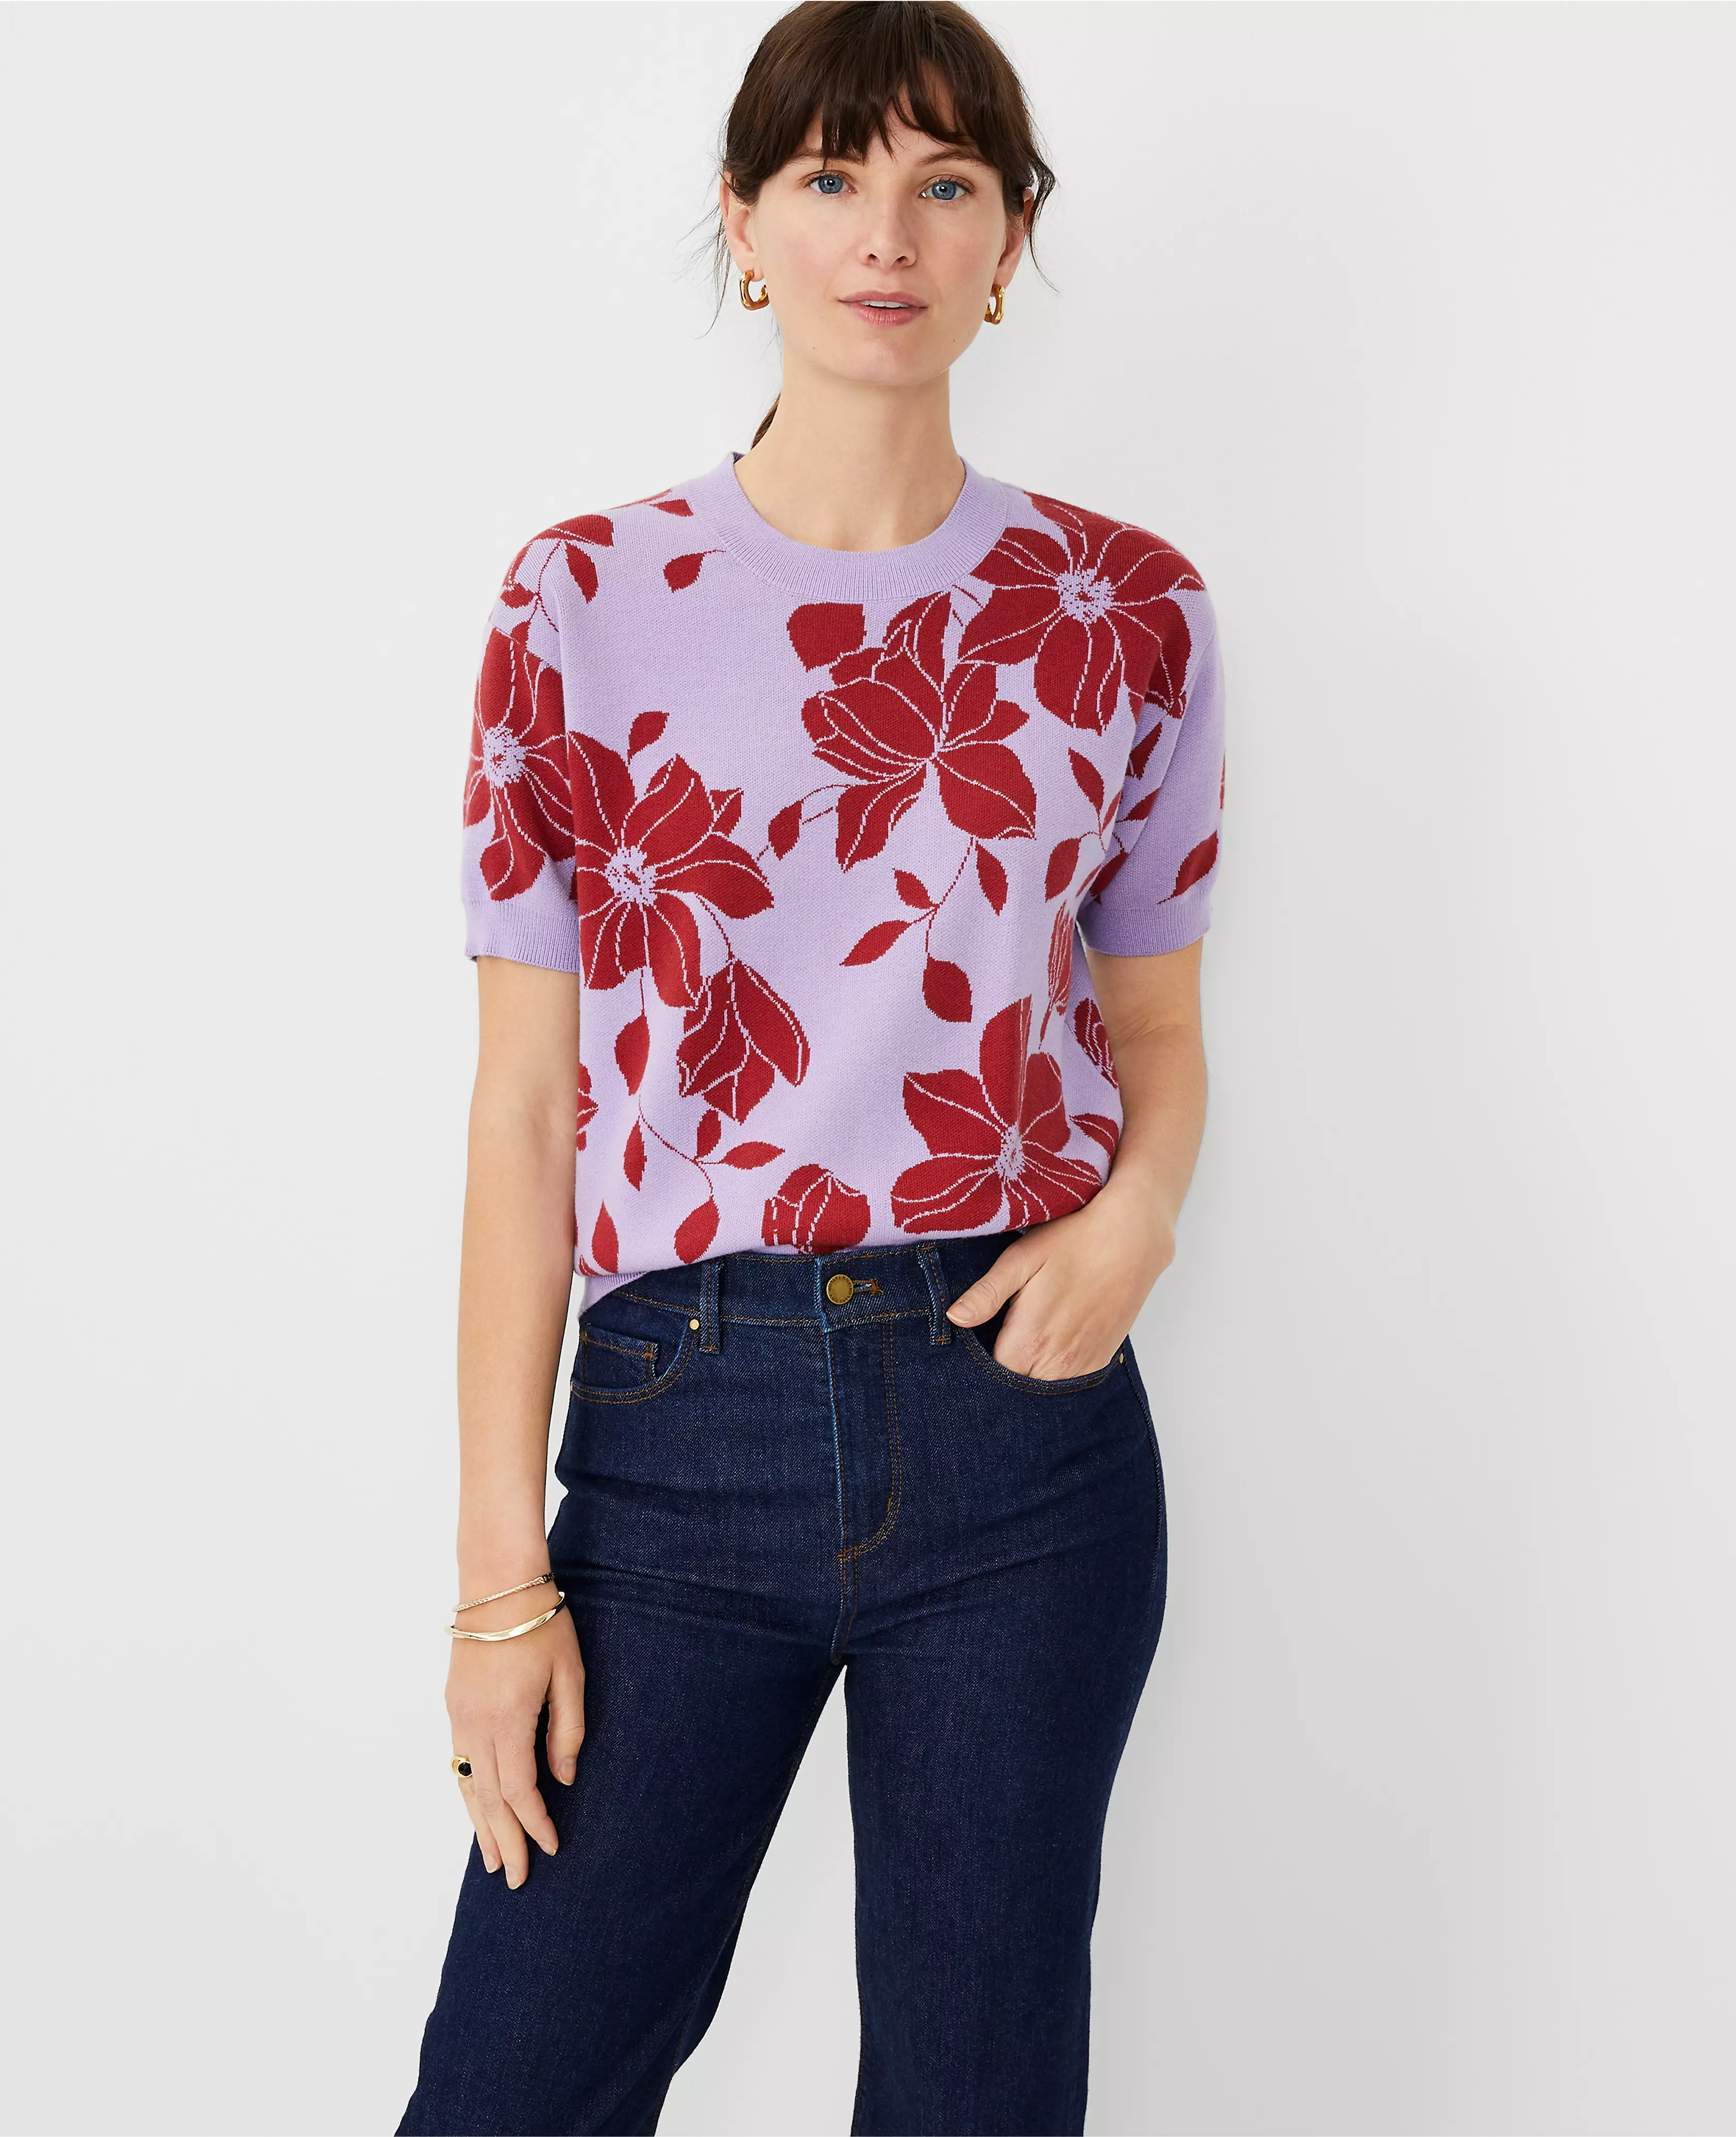 Floral Jacquard Wedge Sweater Tee